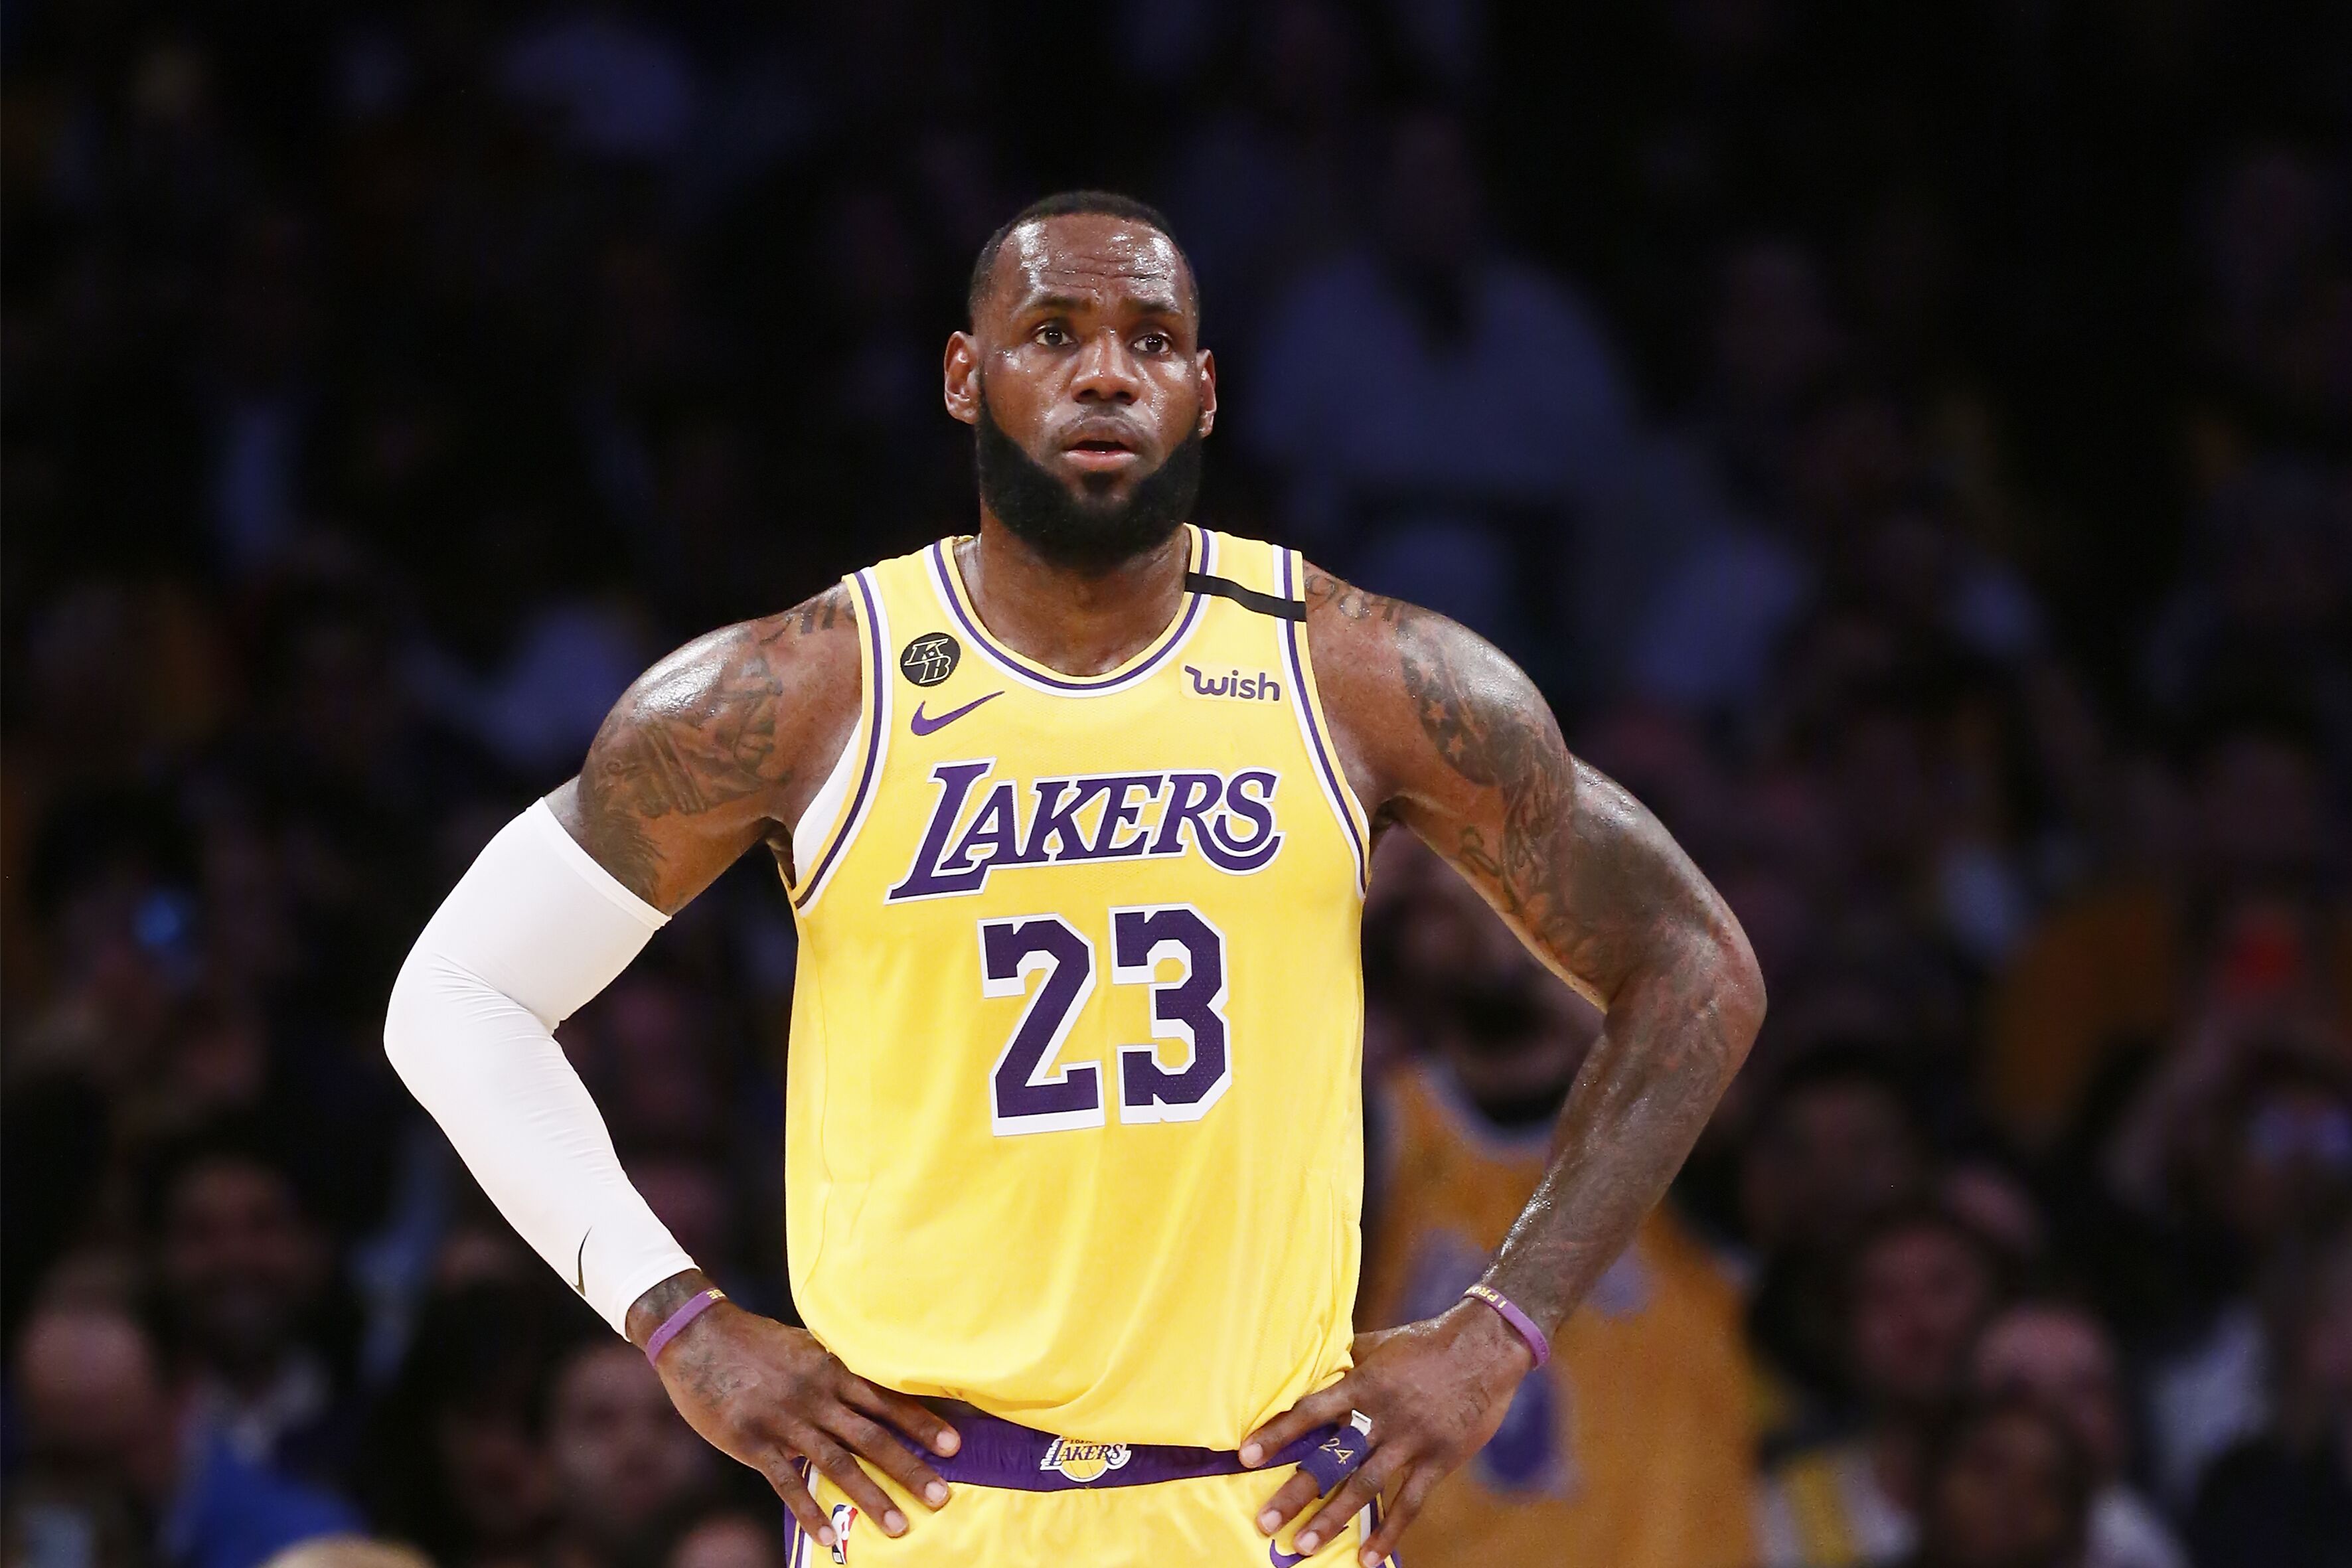 LeBron James ooks on during a game against the Brooklyn Nets at the Staples Center on March 10, 2020 in Los Angeles. | Source: Getty Images